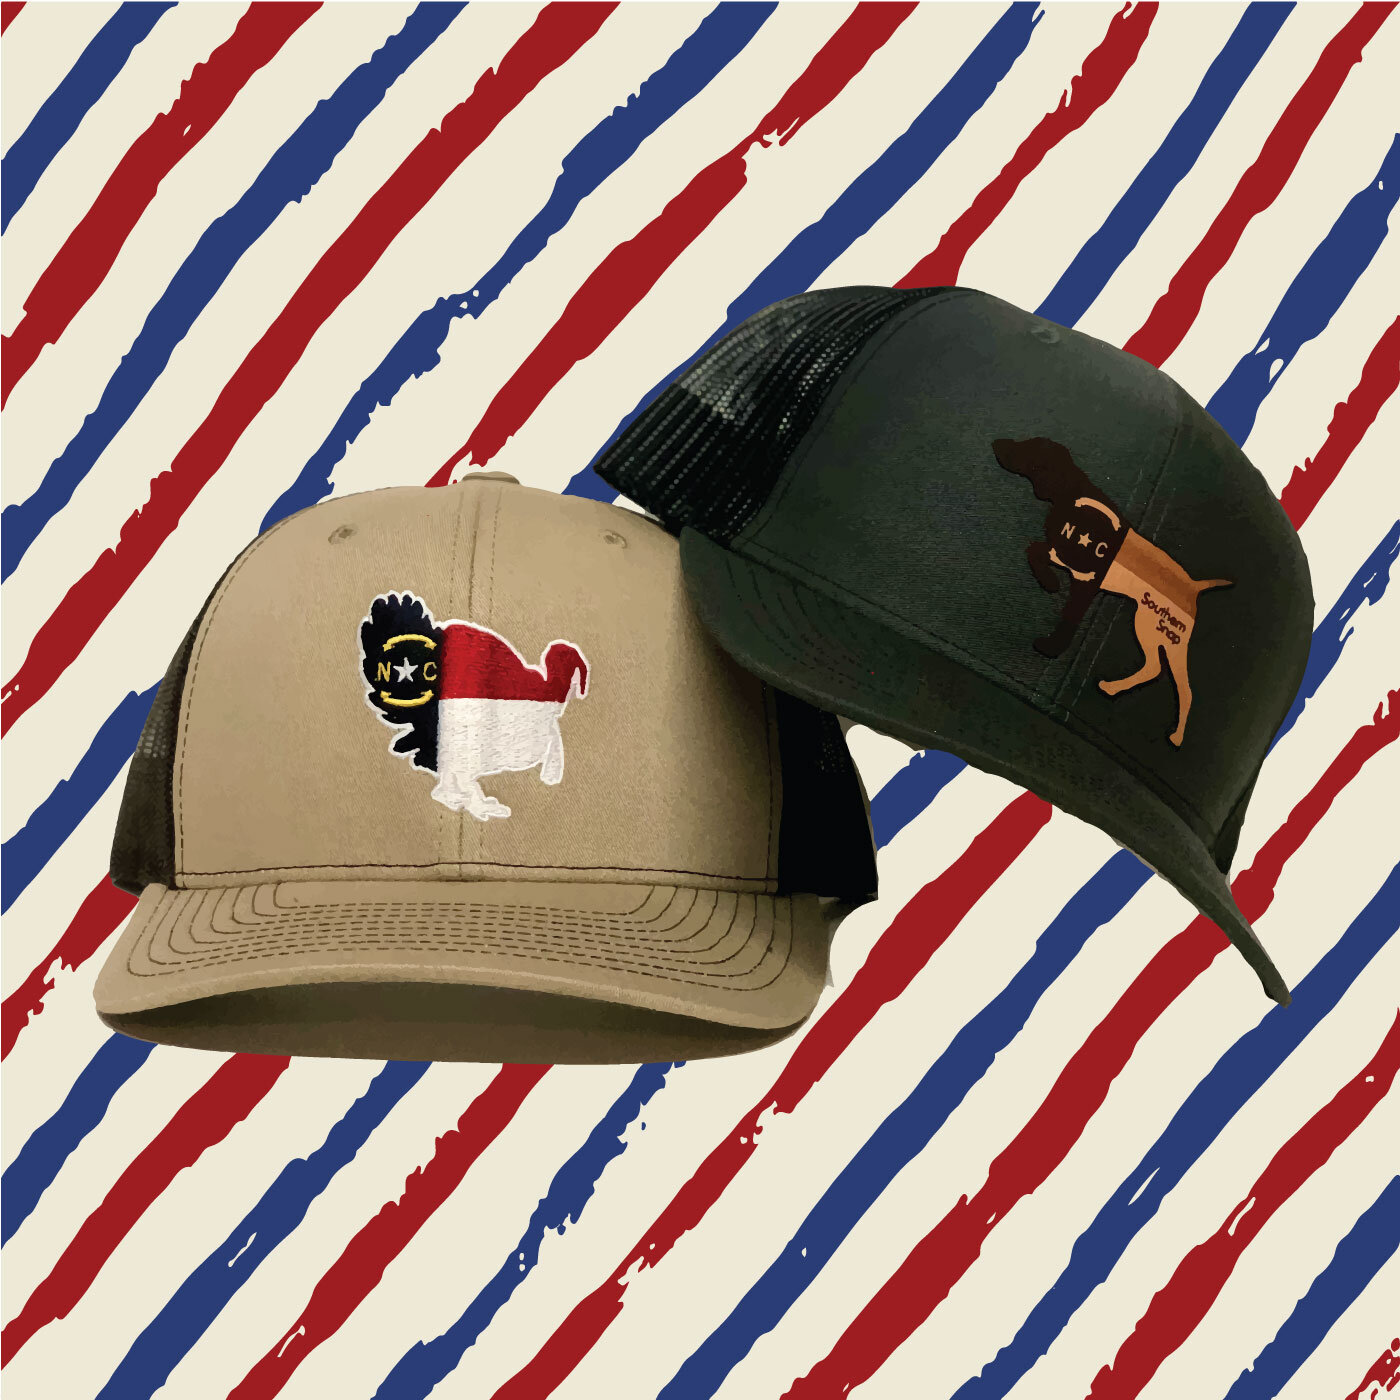 Southern Snap Co. : Best Southern Hat